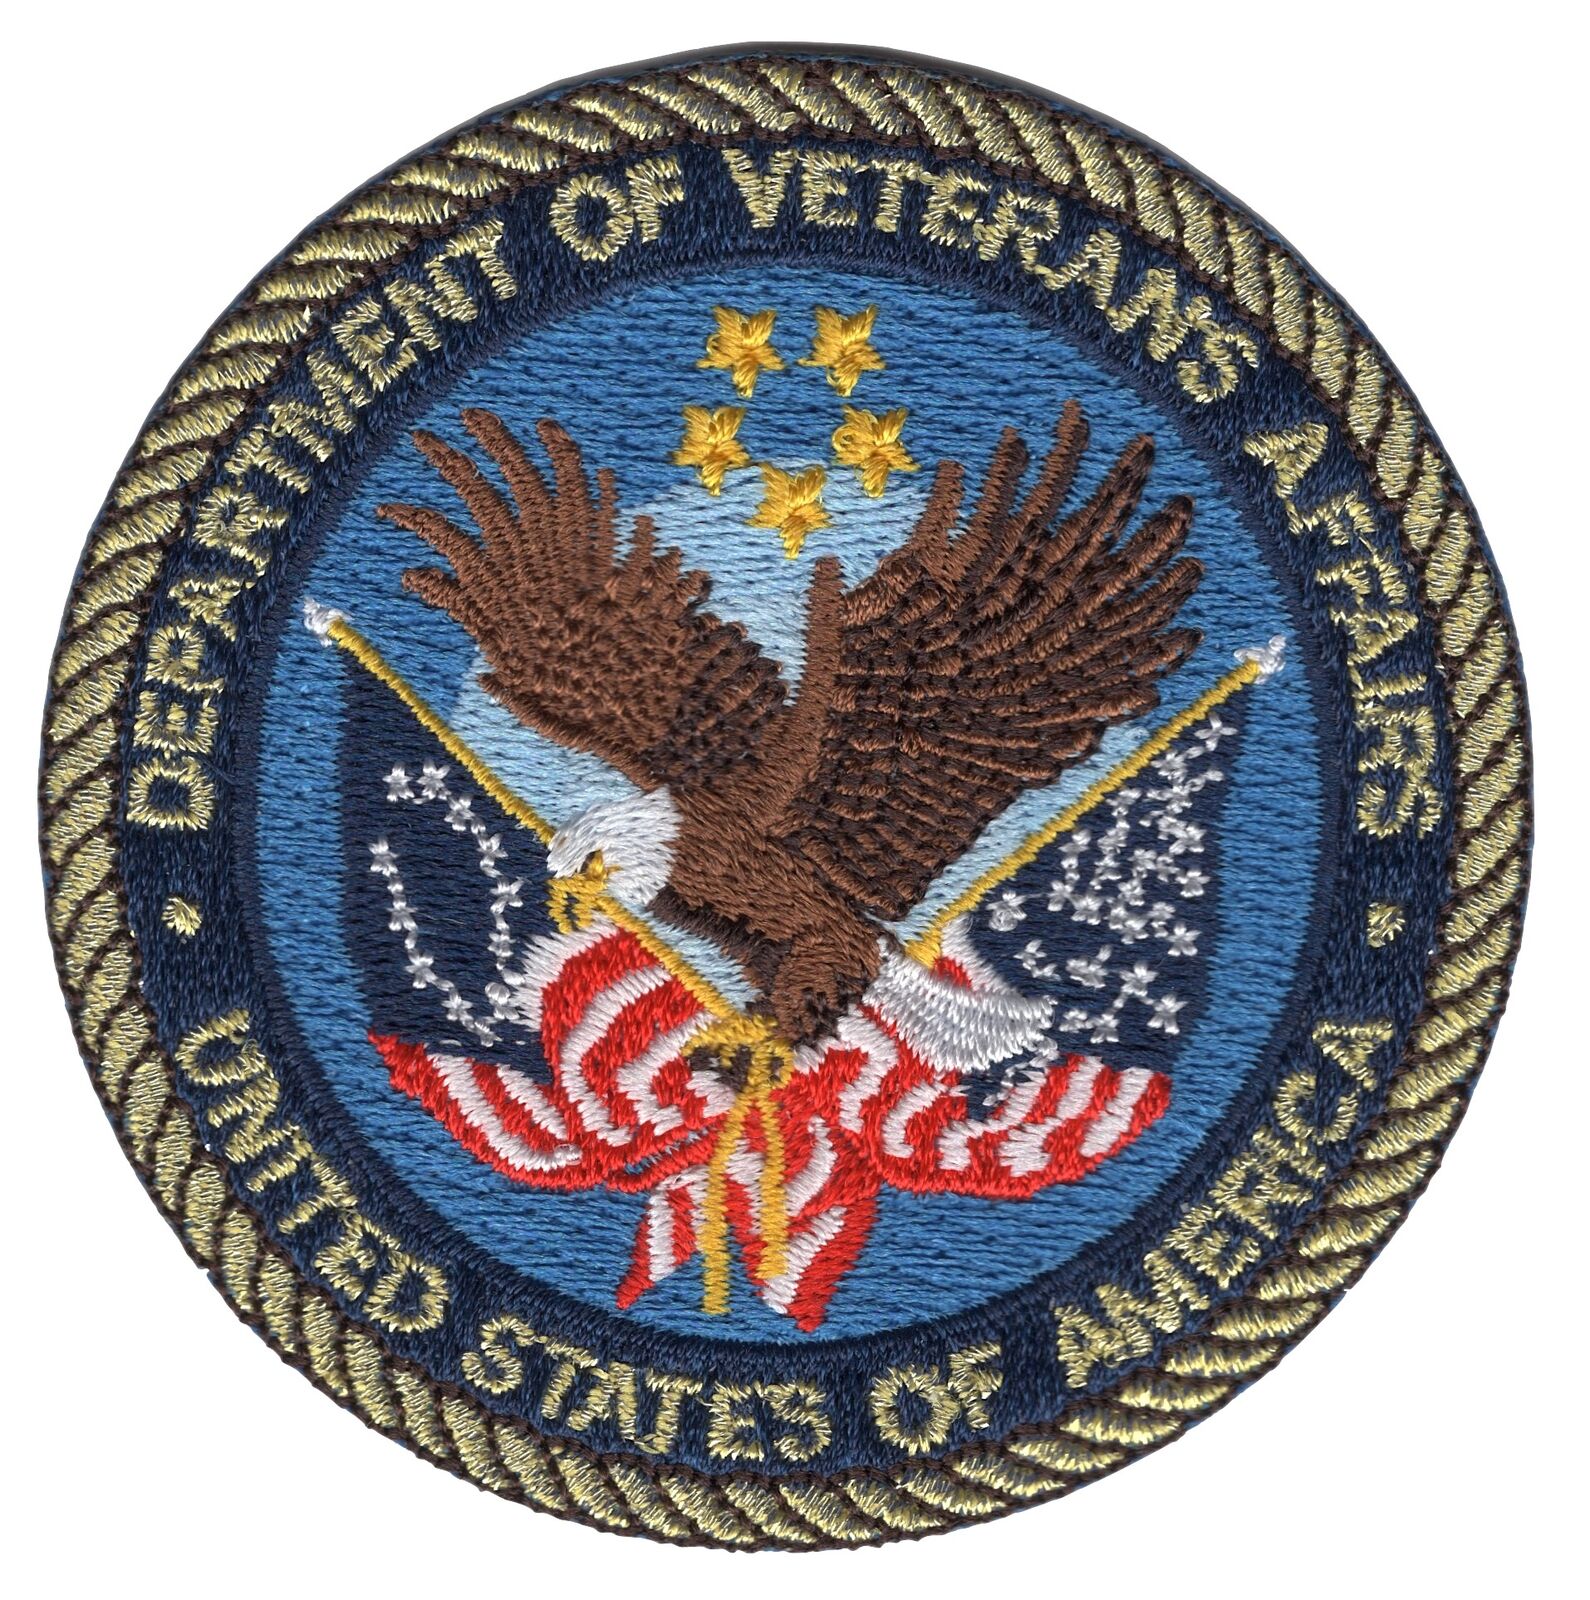 Dept of Veterans Affairs Small Patch